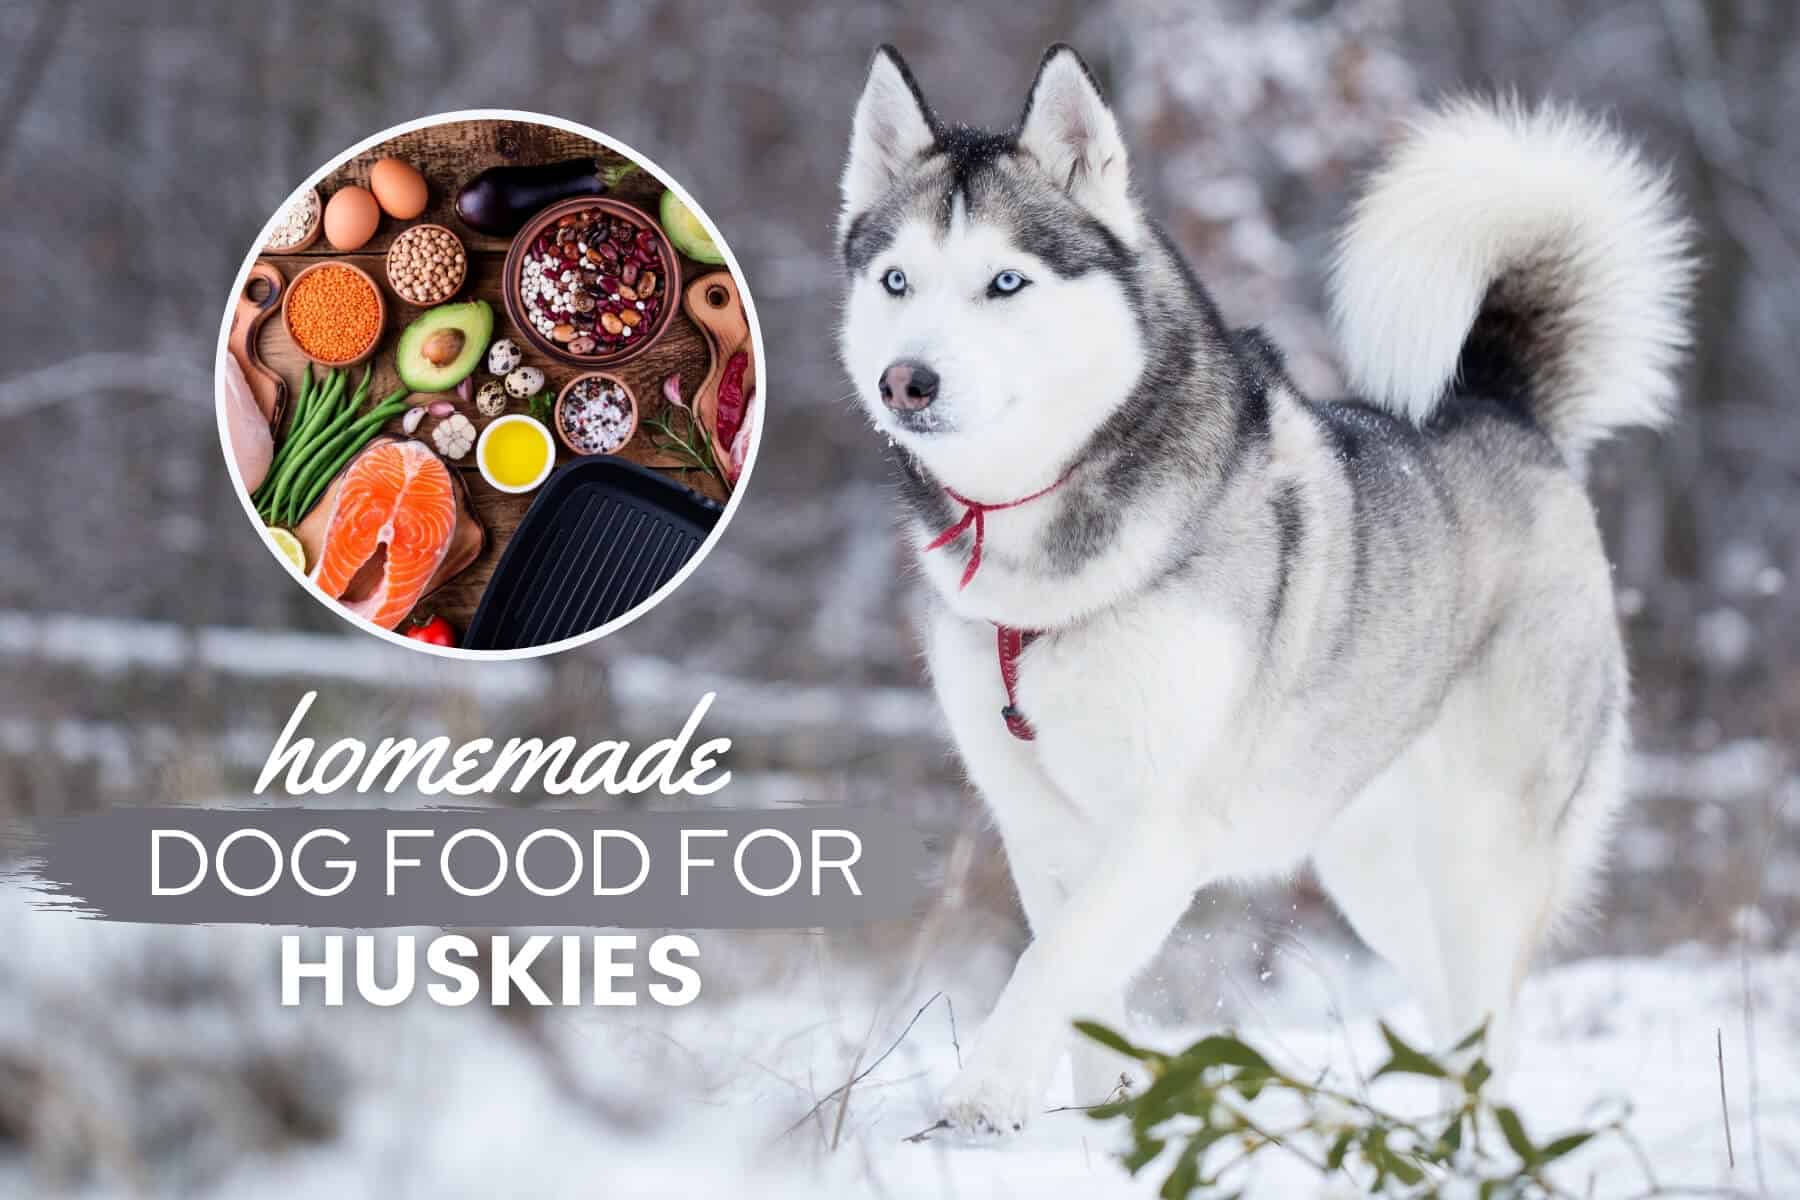 Homemade Dog Food For Huskies: Recipes, Nutrition & Tips - Canine Bible